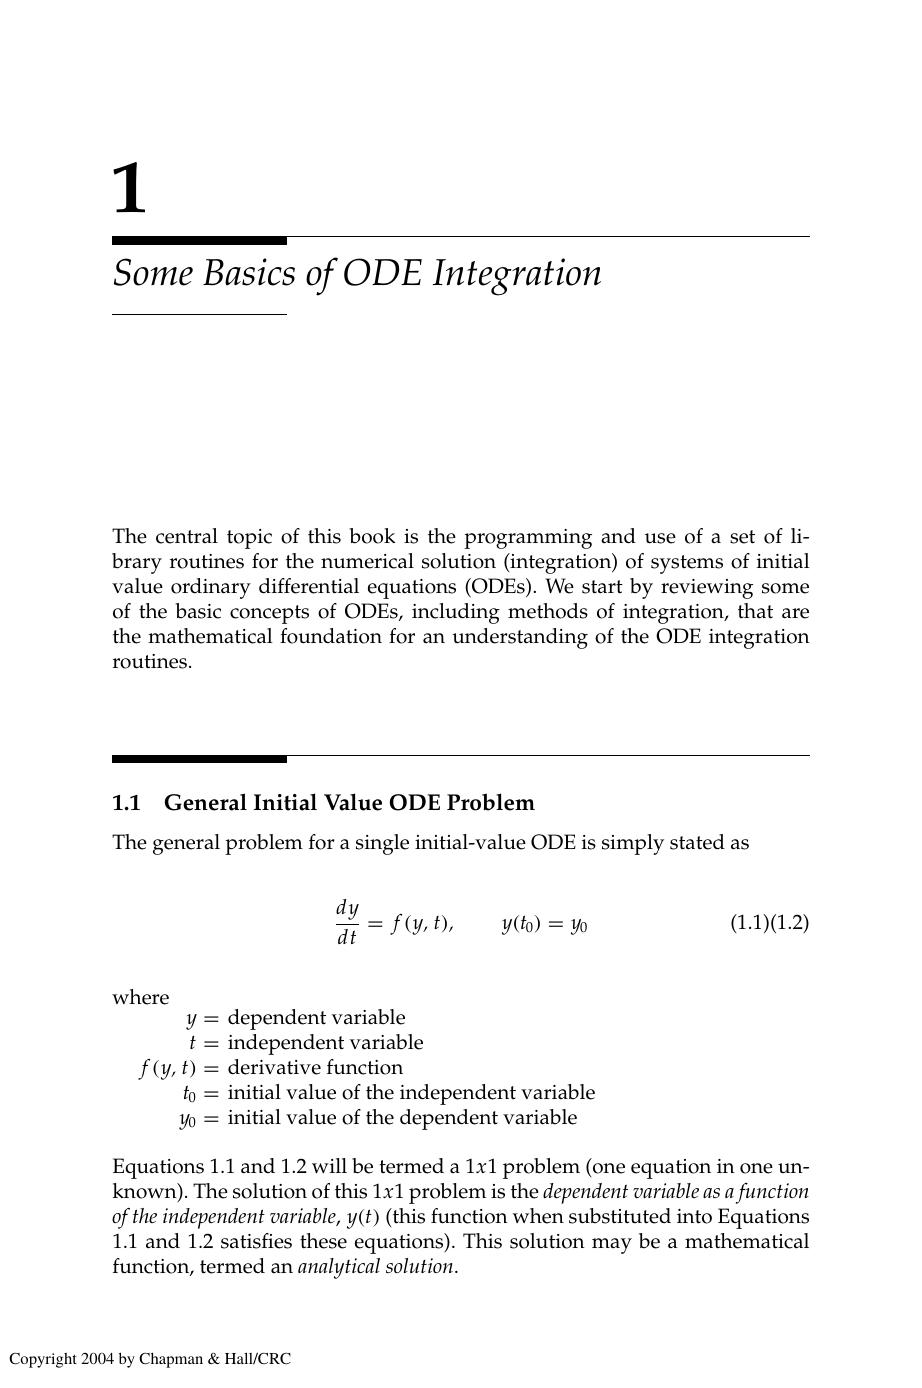 Chapter 1: Some Basics of ODE Integration by H.J. Lee && W.E. Schiesser